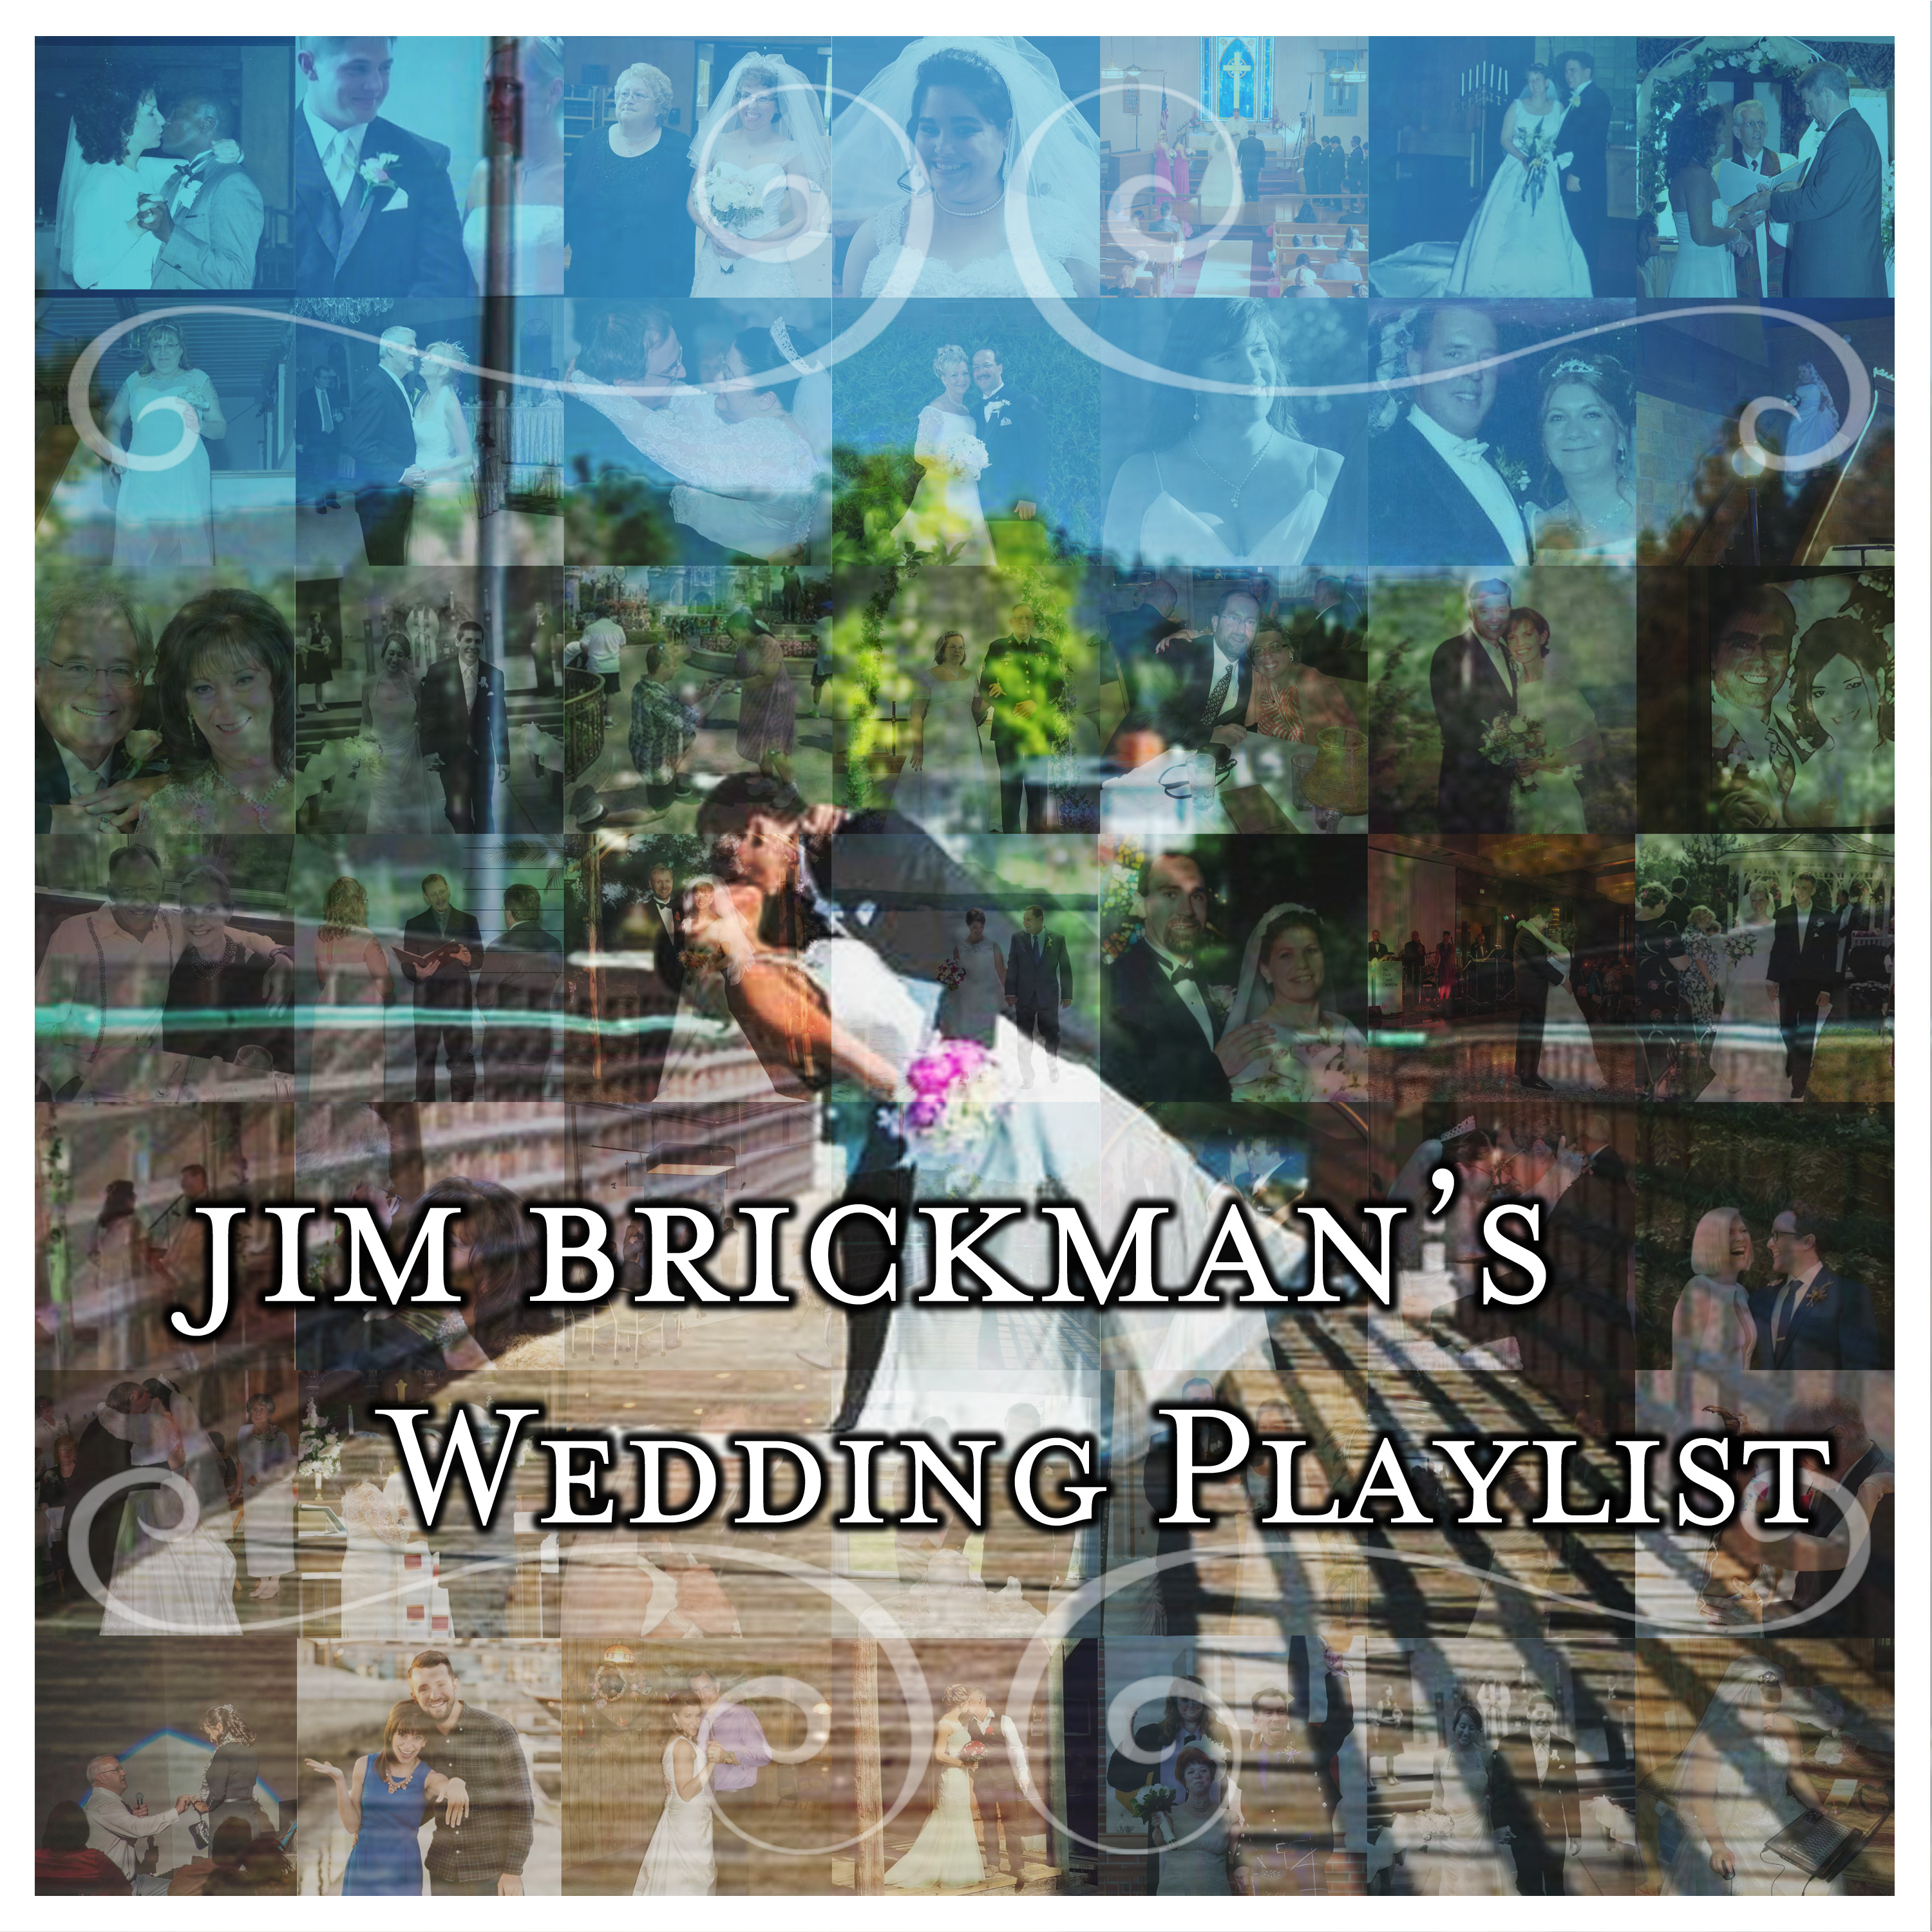 Jim Brickman - Your Love (Official) ft. Michelle Wright 